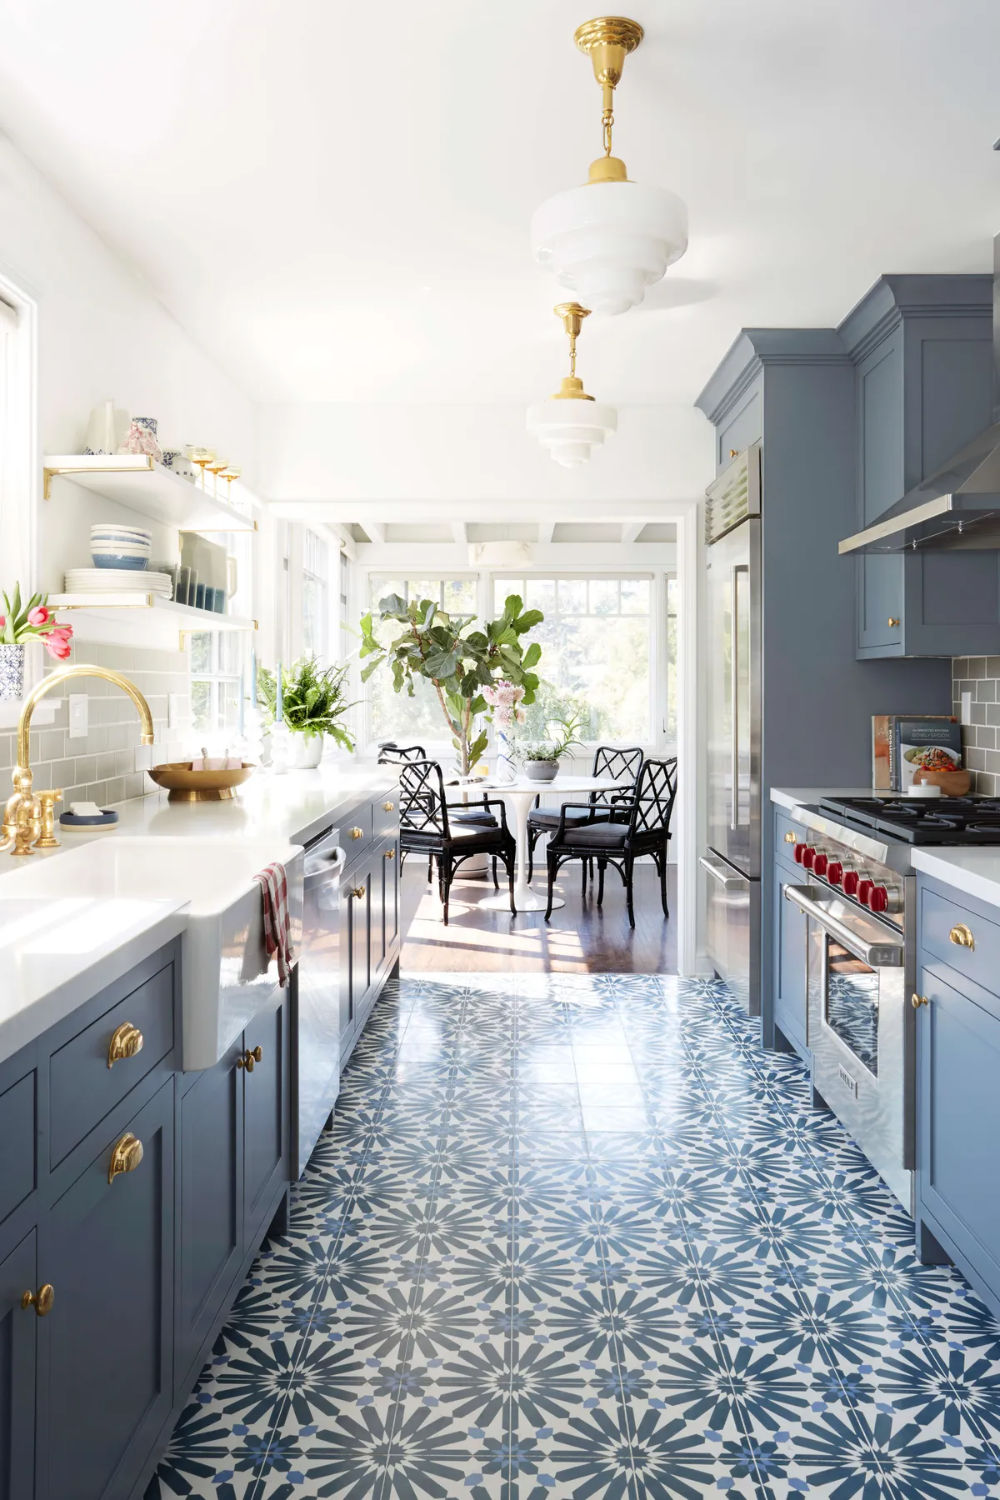 Pros and cons of kitchen flooring
  materials